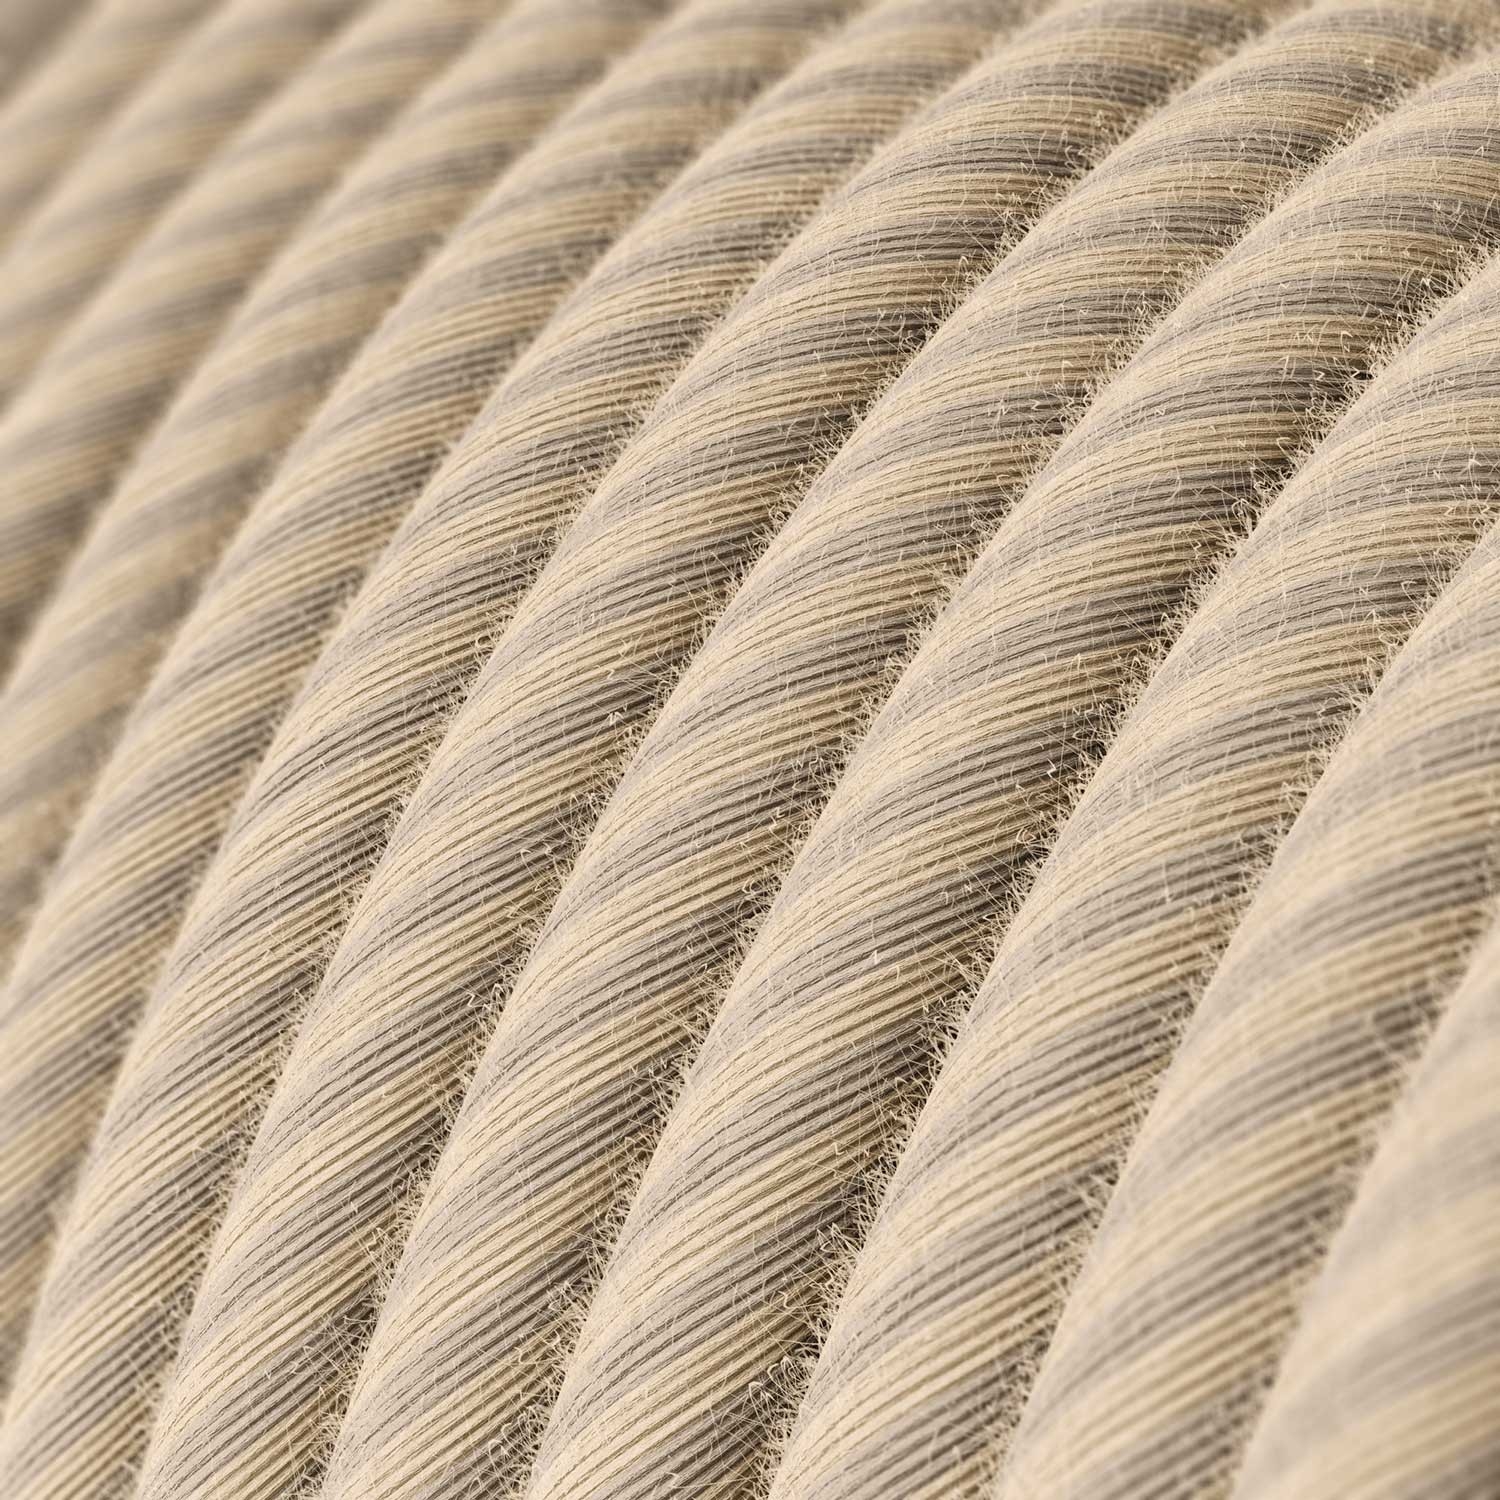 Round Electric Vertigo Cable covered by Straw Cotton and Linen ERD20